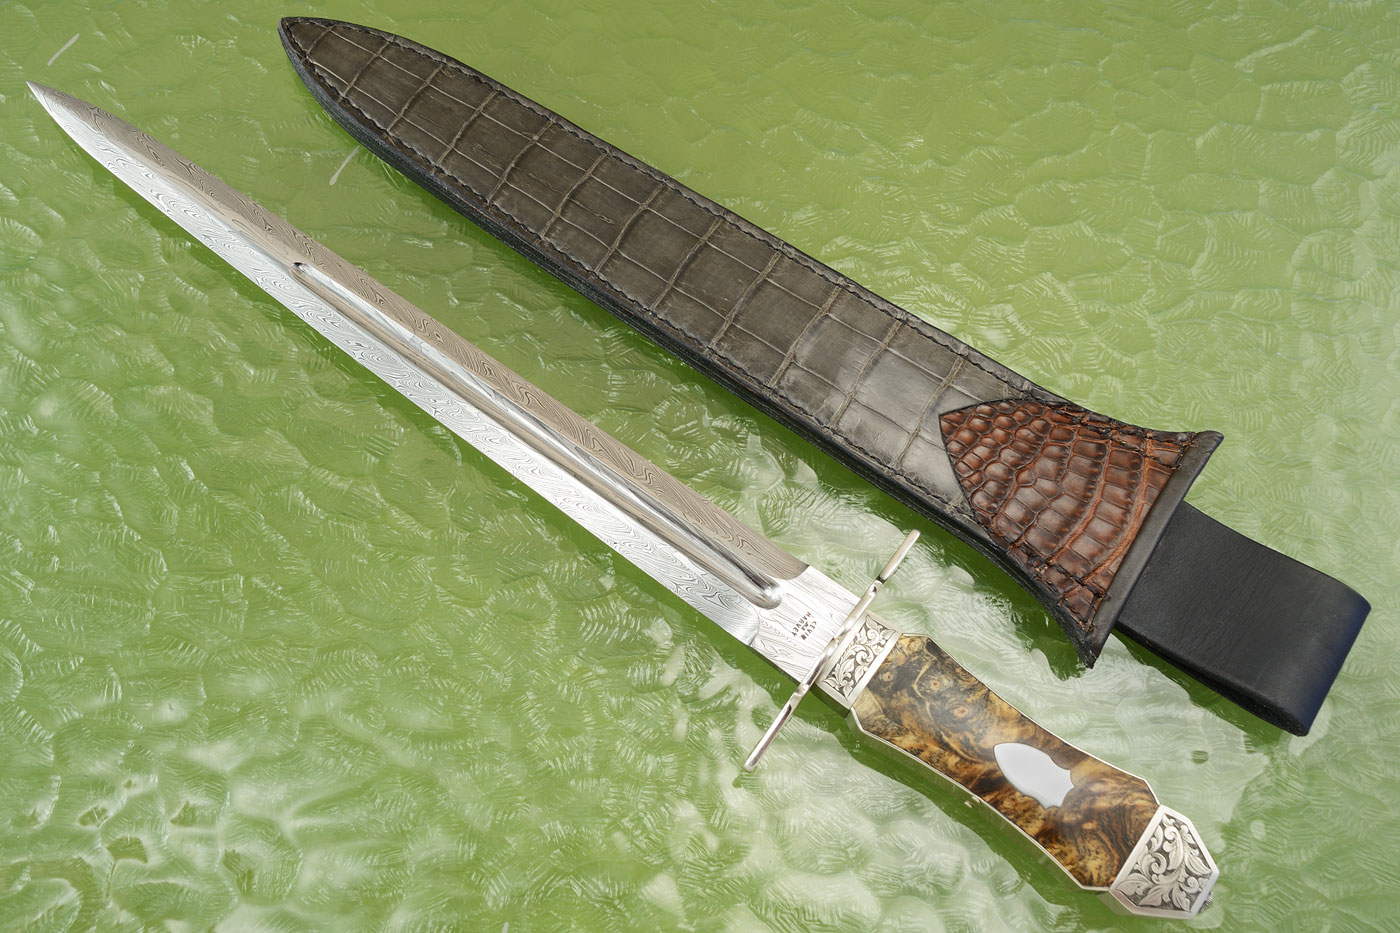 Engraved Frame Handle Damascus Dagger with Buckeye Burl: <i>Best Dagger</i>, <i>Best Own Damascus</i> - Knifemakers' Guild of Southern Africa Show, 2019